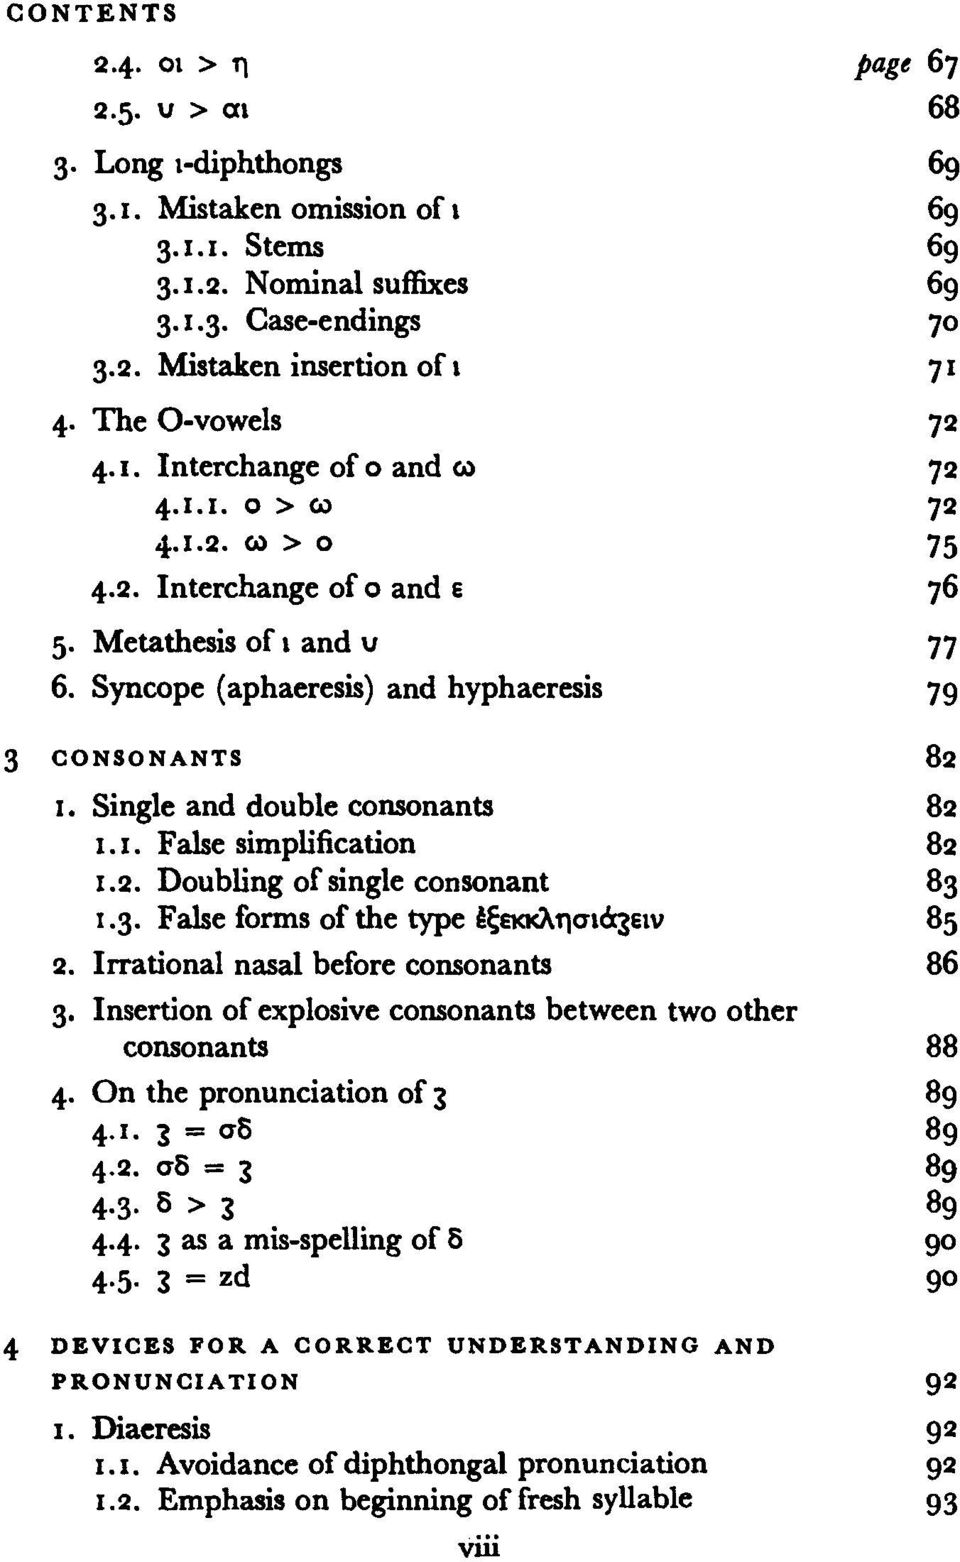 Single and double consonants 82 1.1. False simplification 82 1.2. Doubling of single consonant 83 1.3. False forms of the type έξεκκλησιόςειν 85 2. Irrational nasal before consonants 86 3.